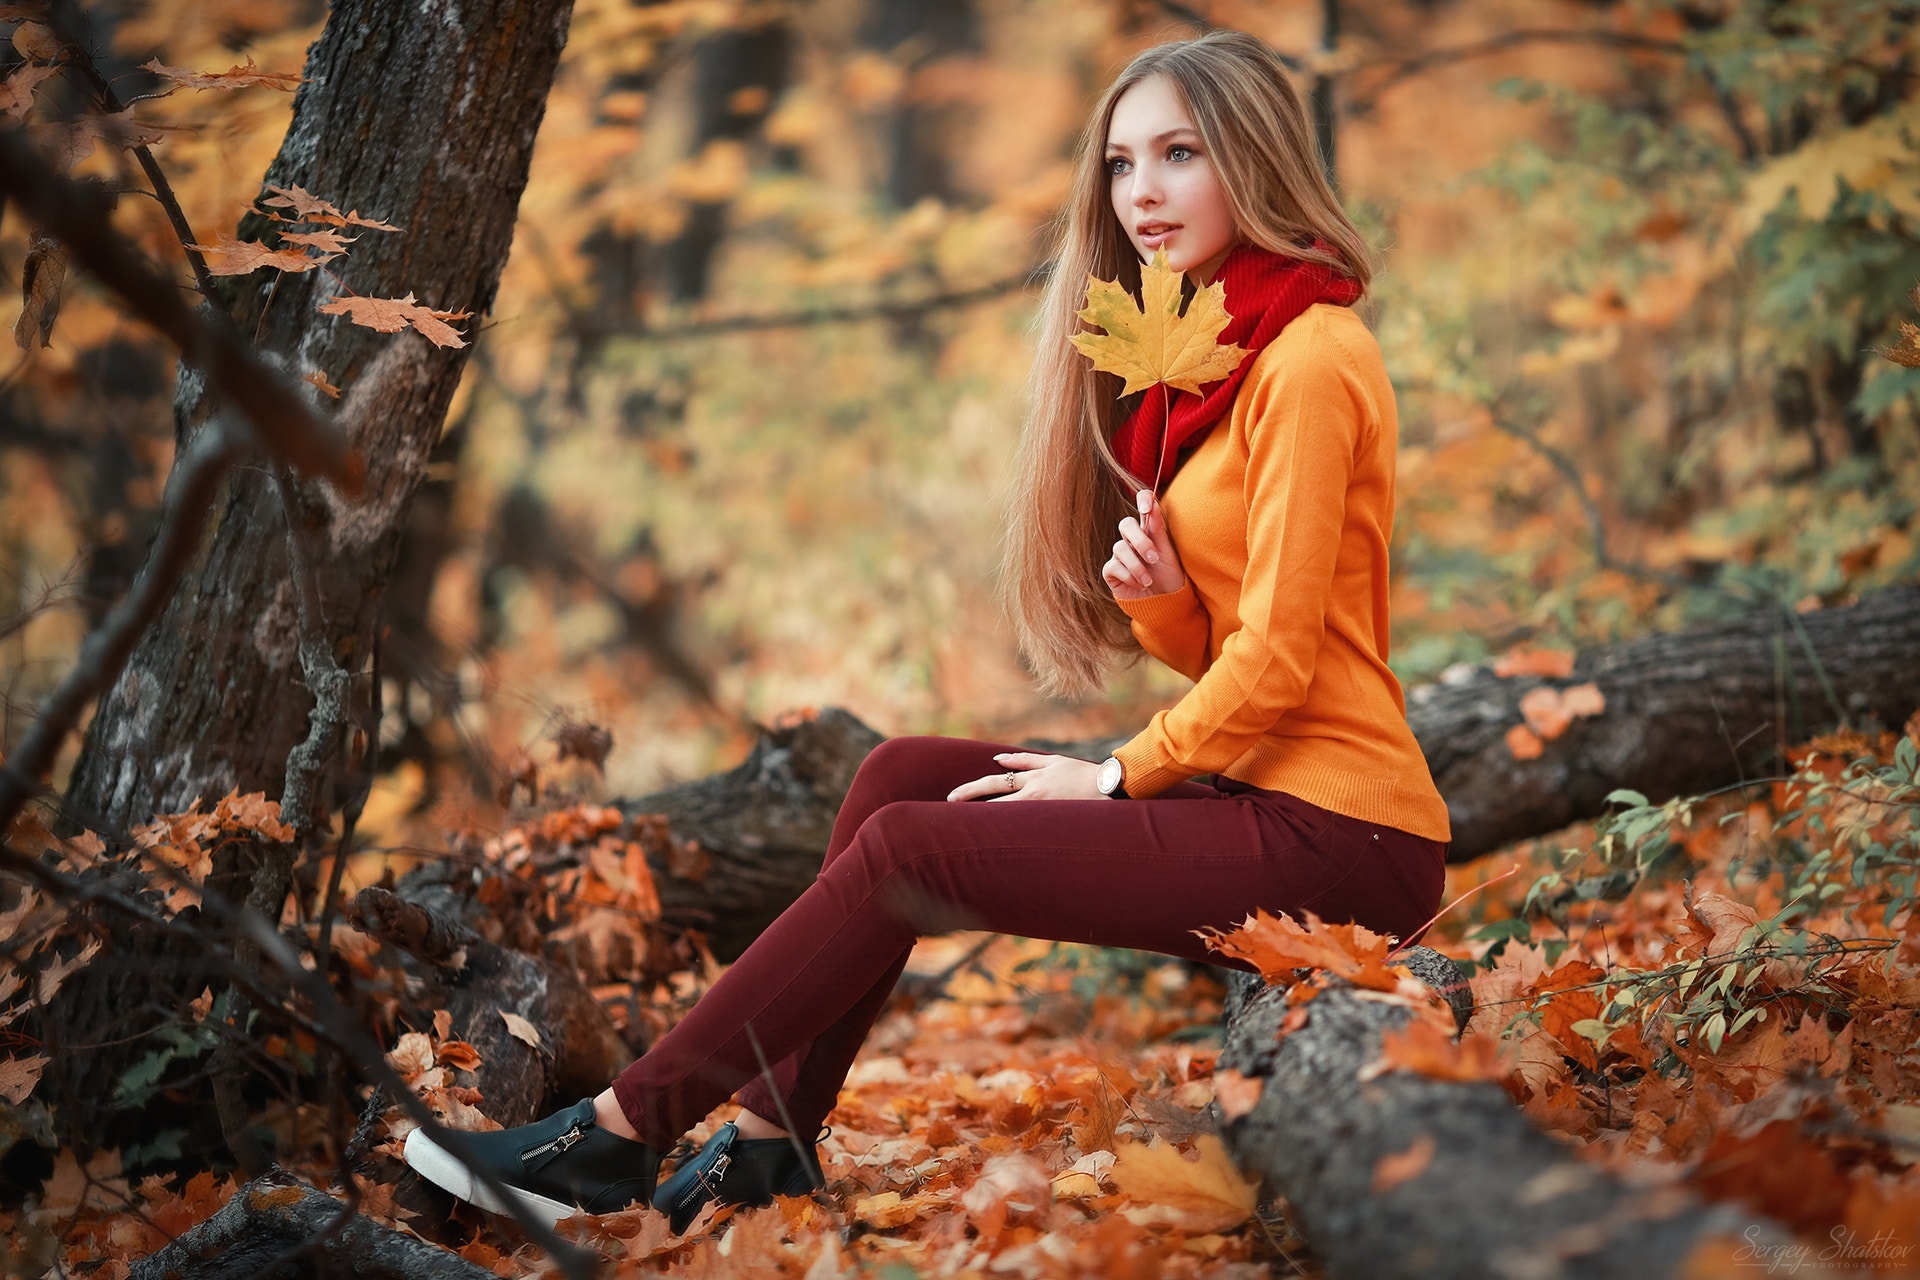 Women Model Fall Blonde Leaves Scarf Forest Yellow Sweater Red Pants Women Outdoors 1920x1280